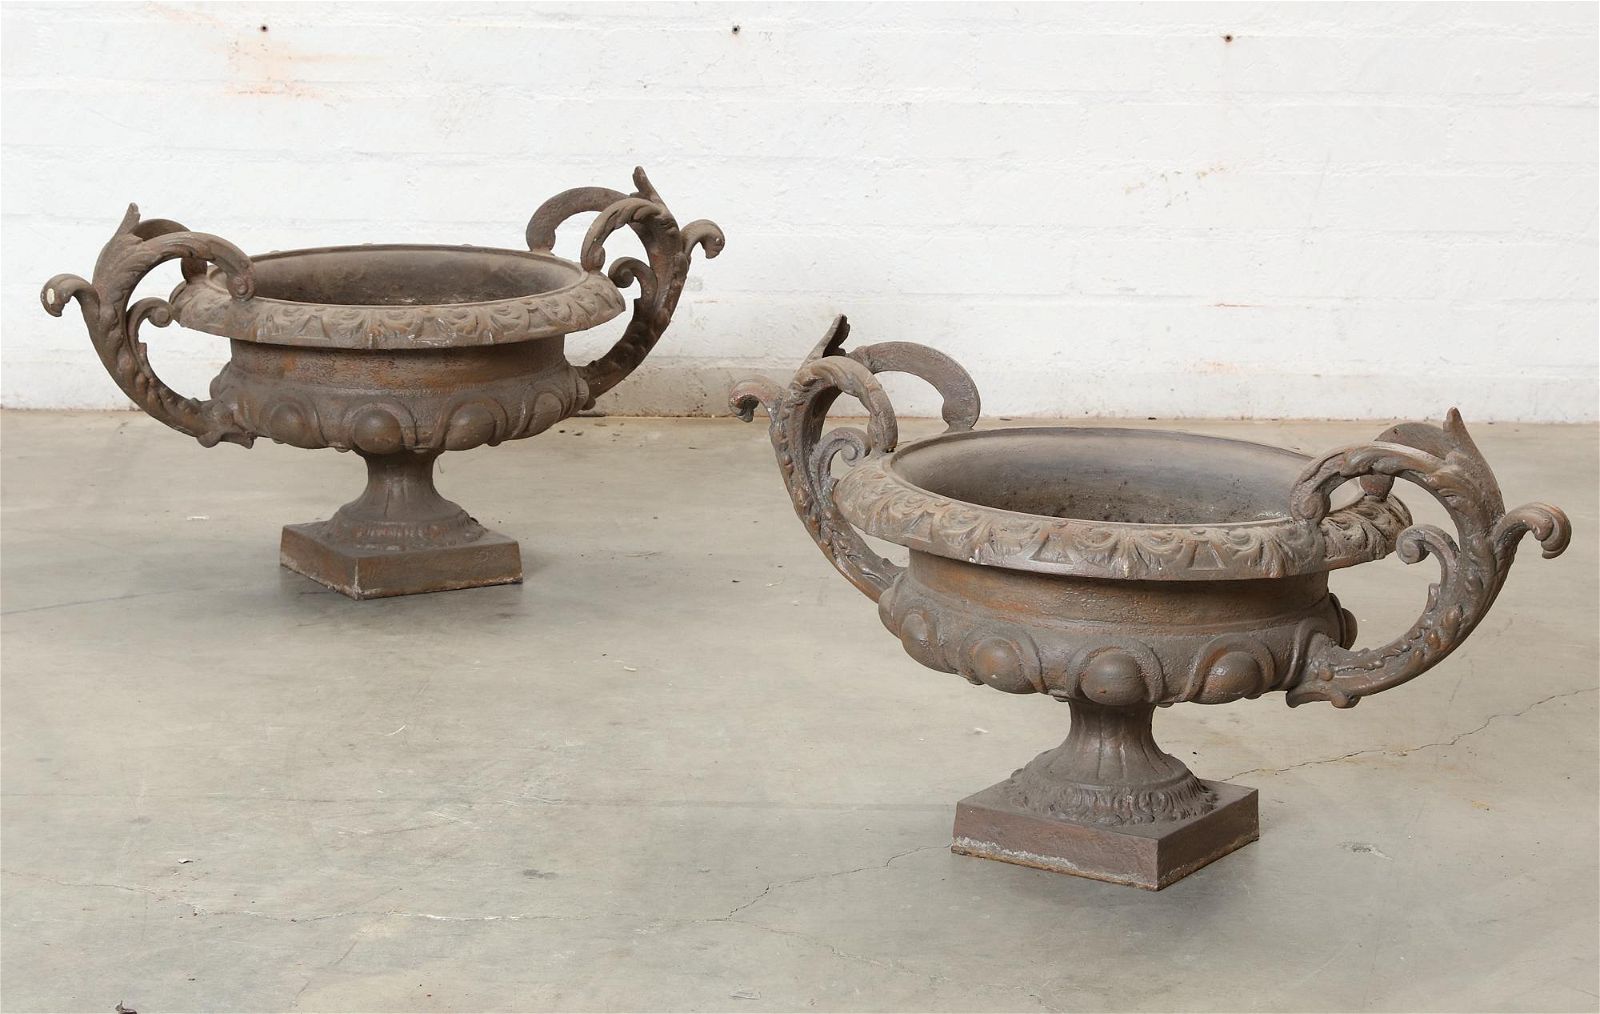 PAIR OF NEOCLASSICAL STYLE CAST